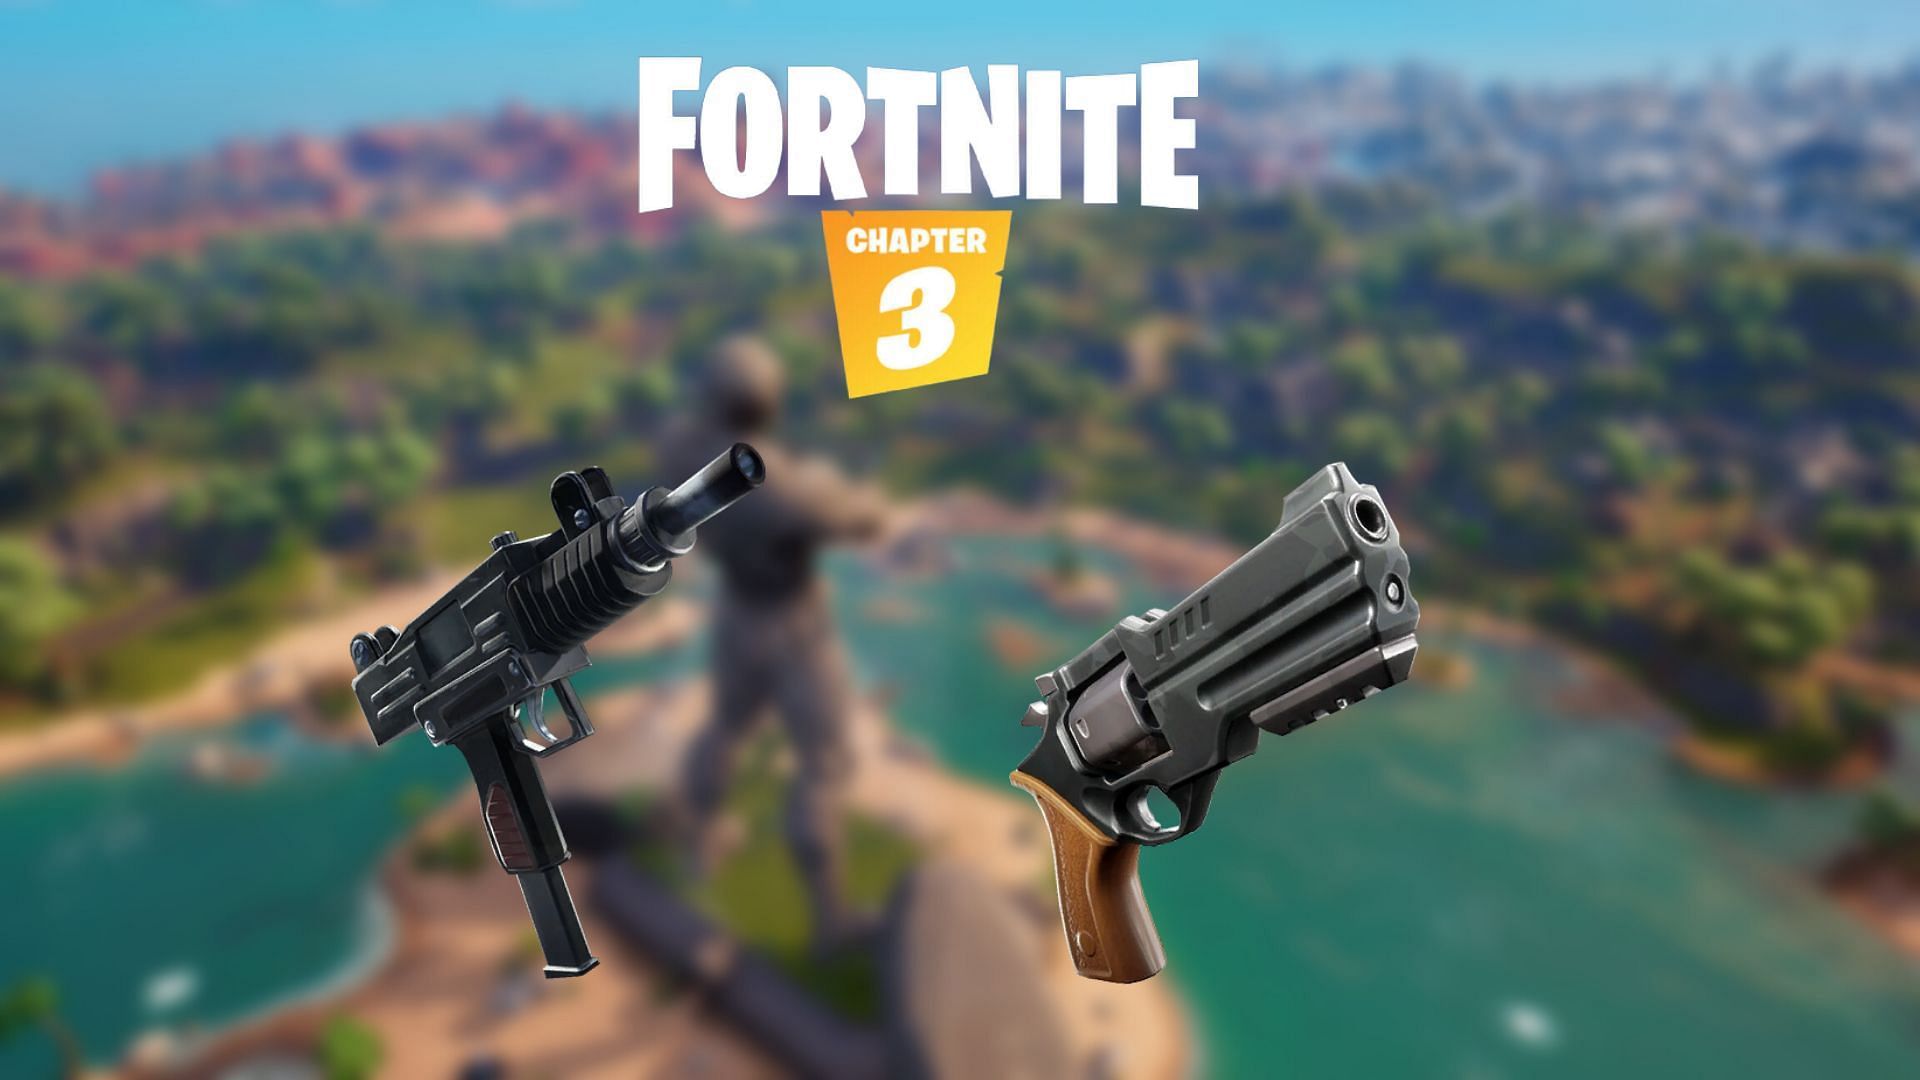 With the pistols out of use in Chapter 3, Epic is bringing back two old weapons (Image via Sportskeeda)